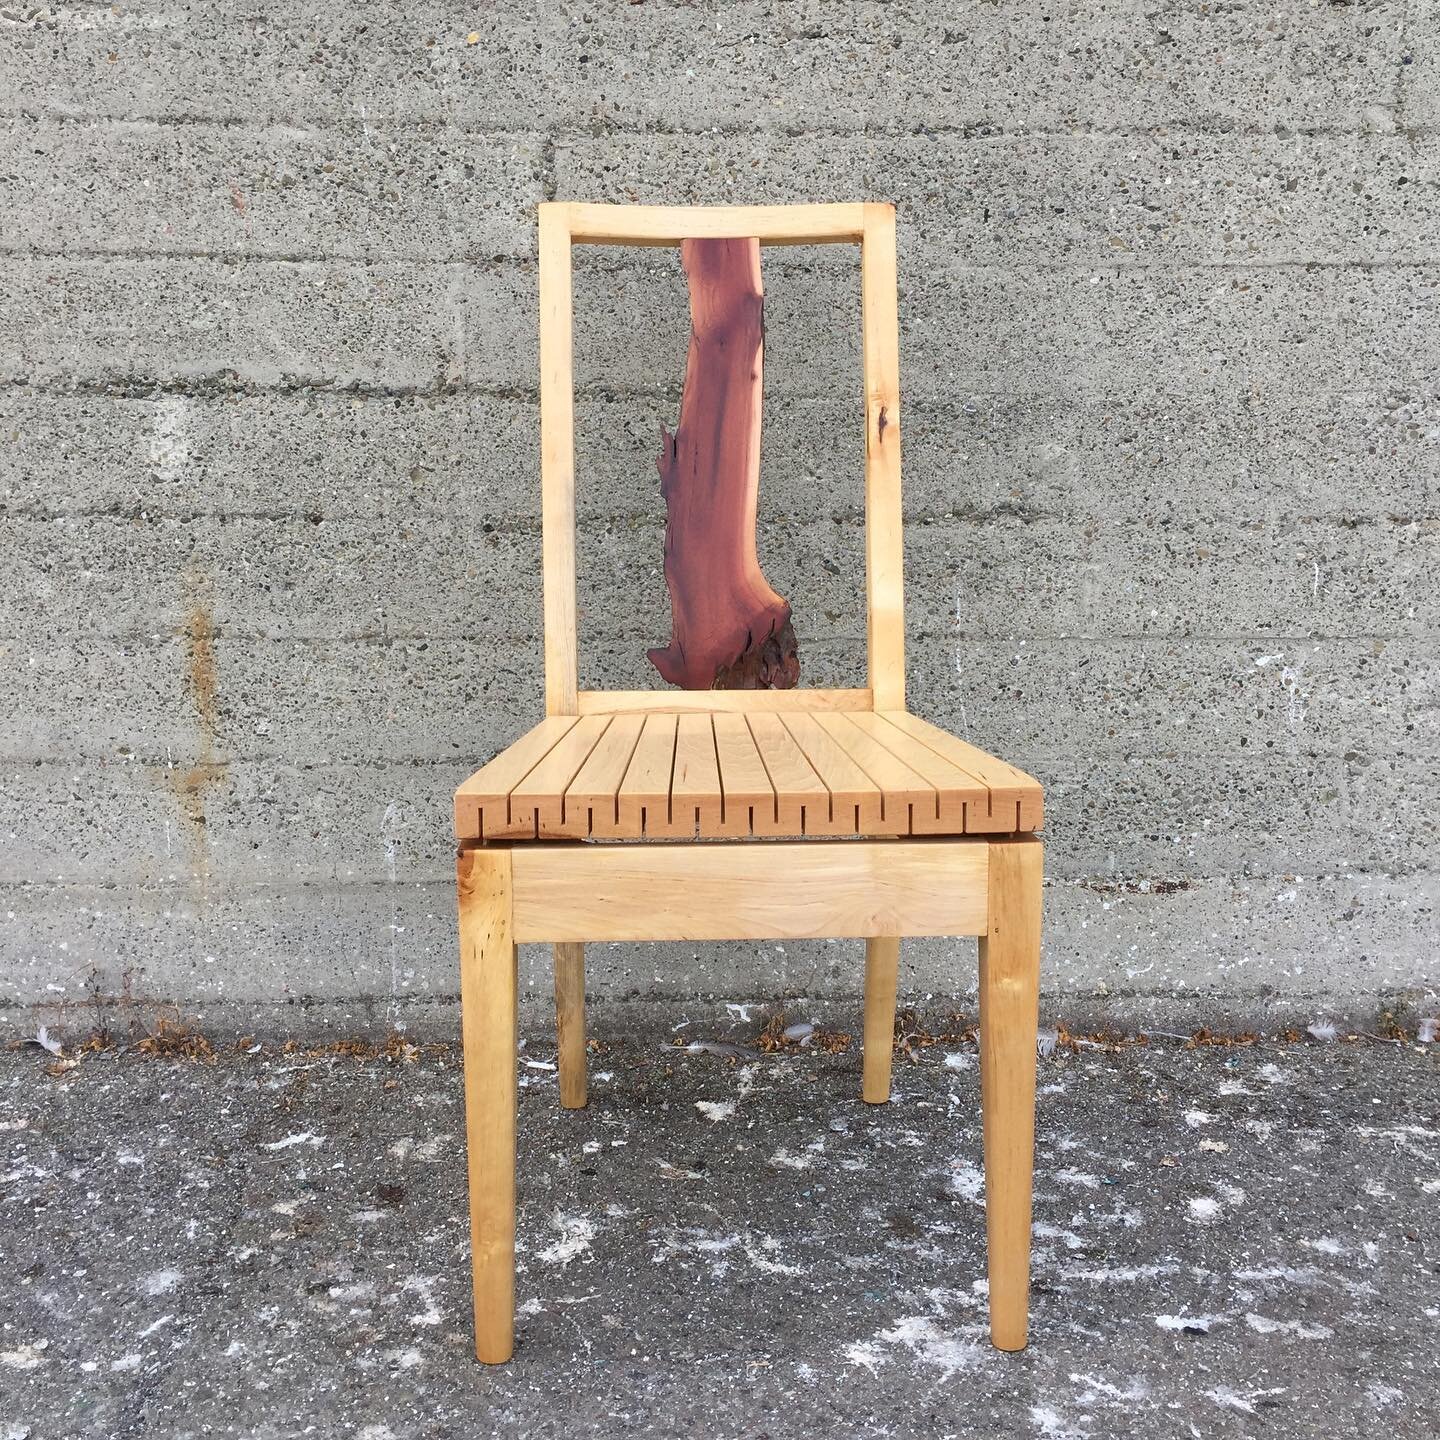 Another chair restoration complete and ready for its closeup. 

#handplanefest #8Branches #rescuechair #handmadechair #madeinsf #8branchesproject #sfwoodworking
#ecofurniture #ecohome #ecodesign #ecodecor #sustainable